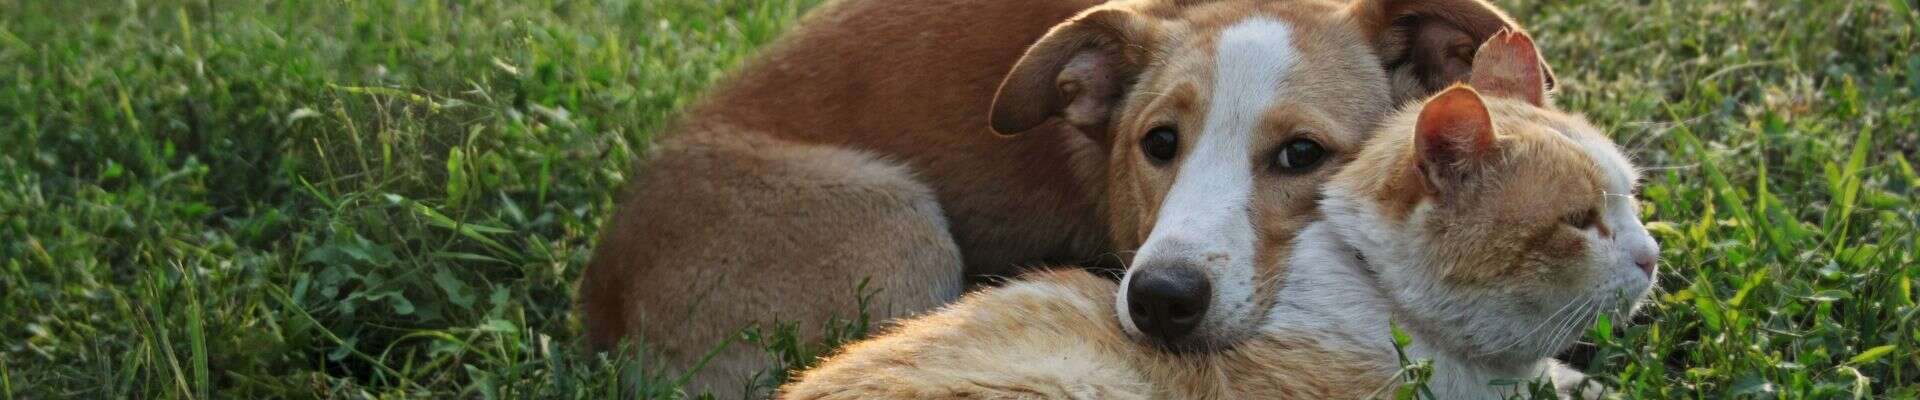 A cat and a dog snuggling in the grass